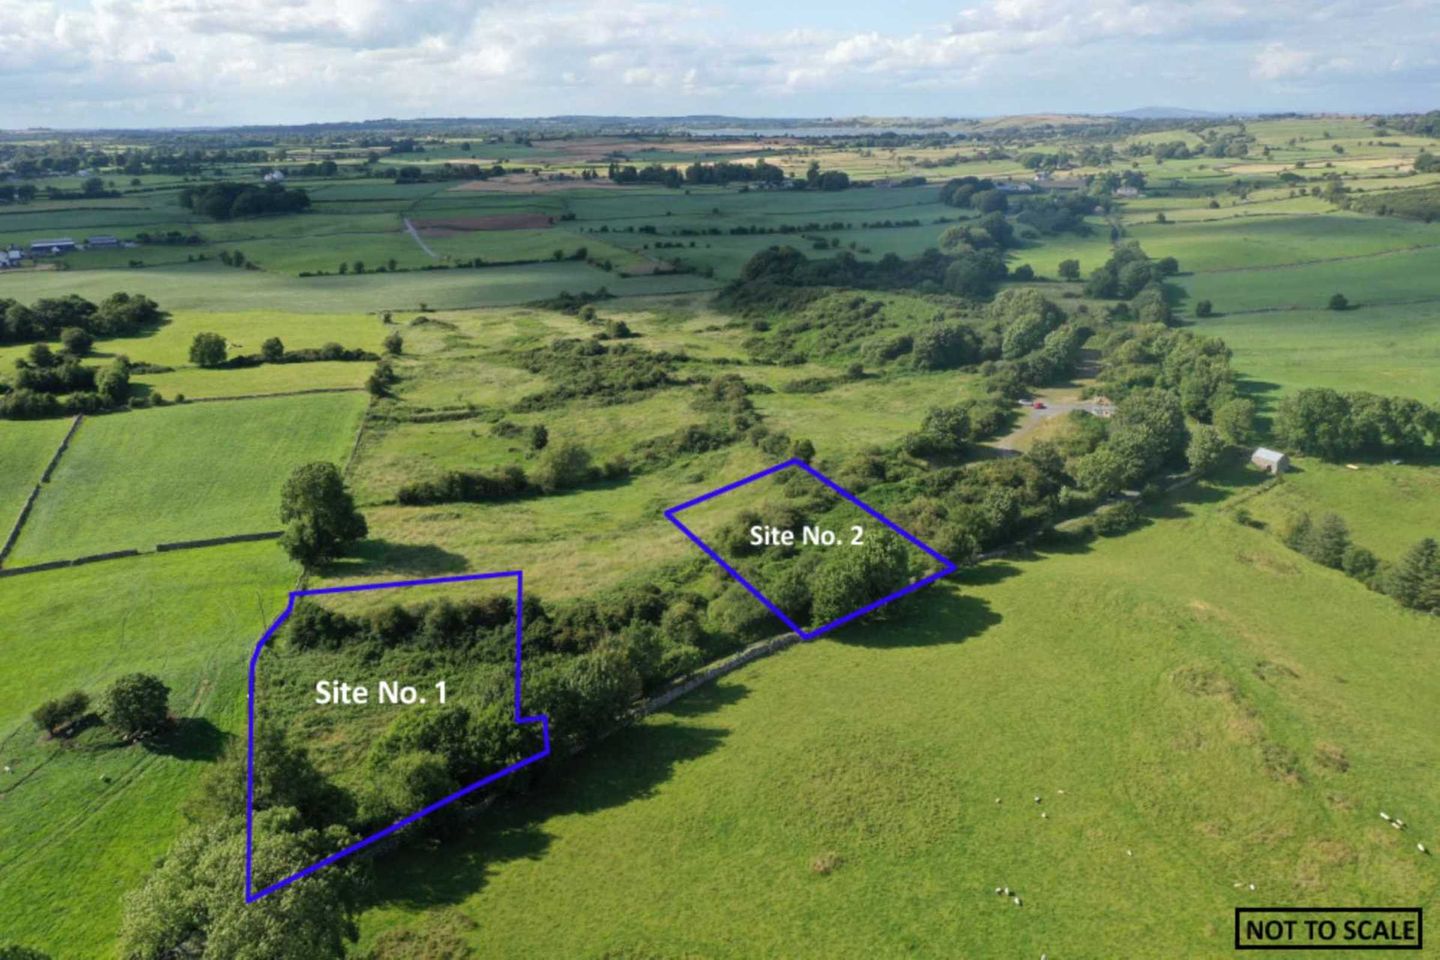 c. 0.79 Acre Site at Gortnasythe, Curraghboy, Co. Roscommon